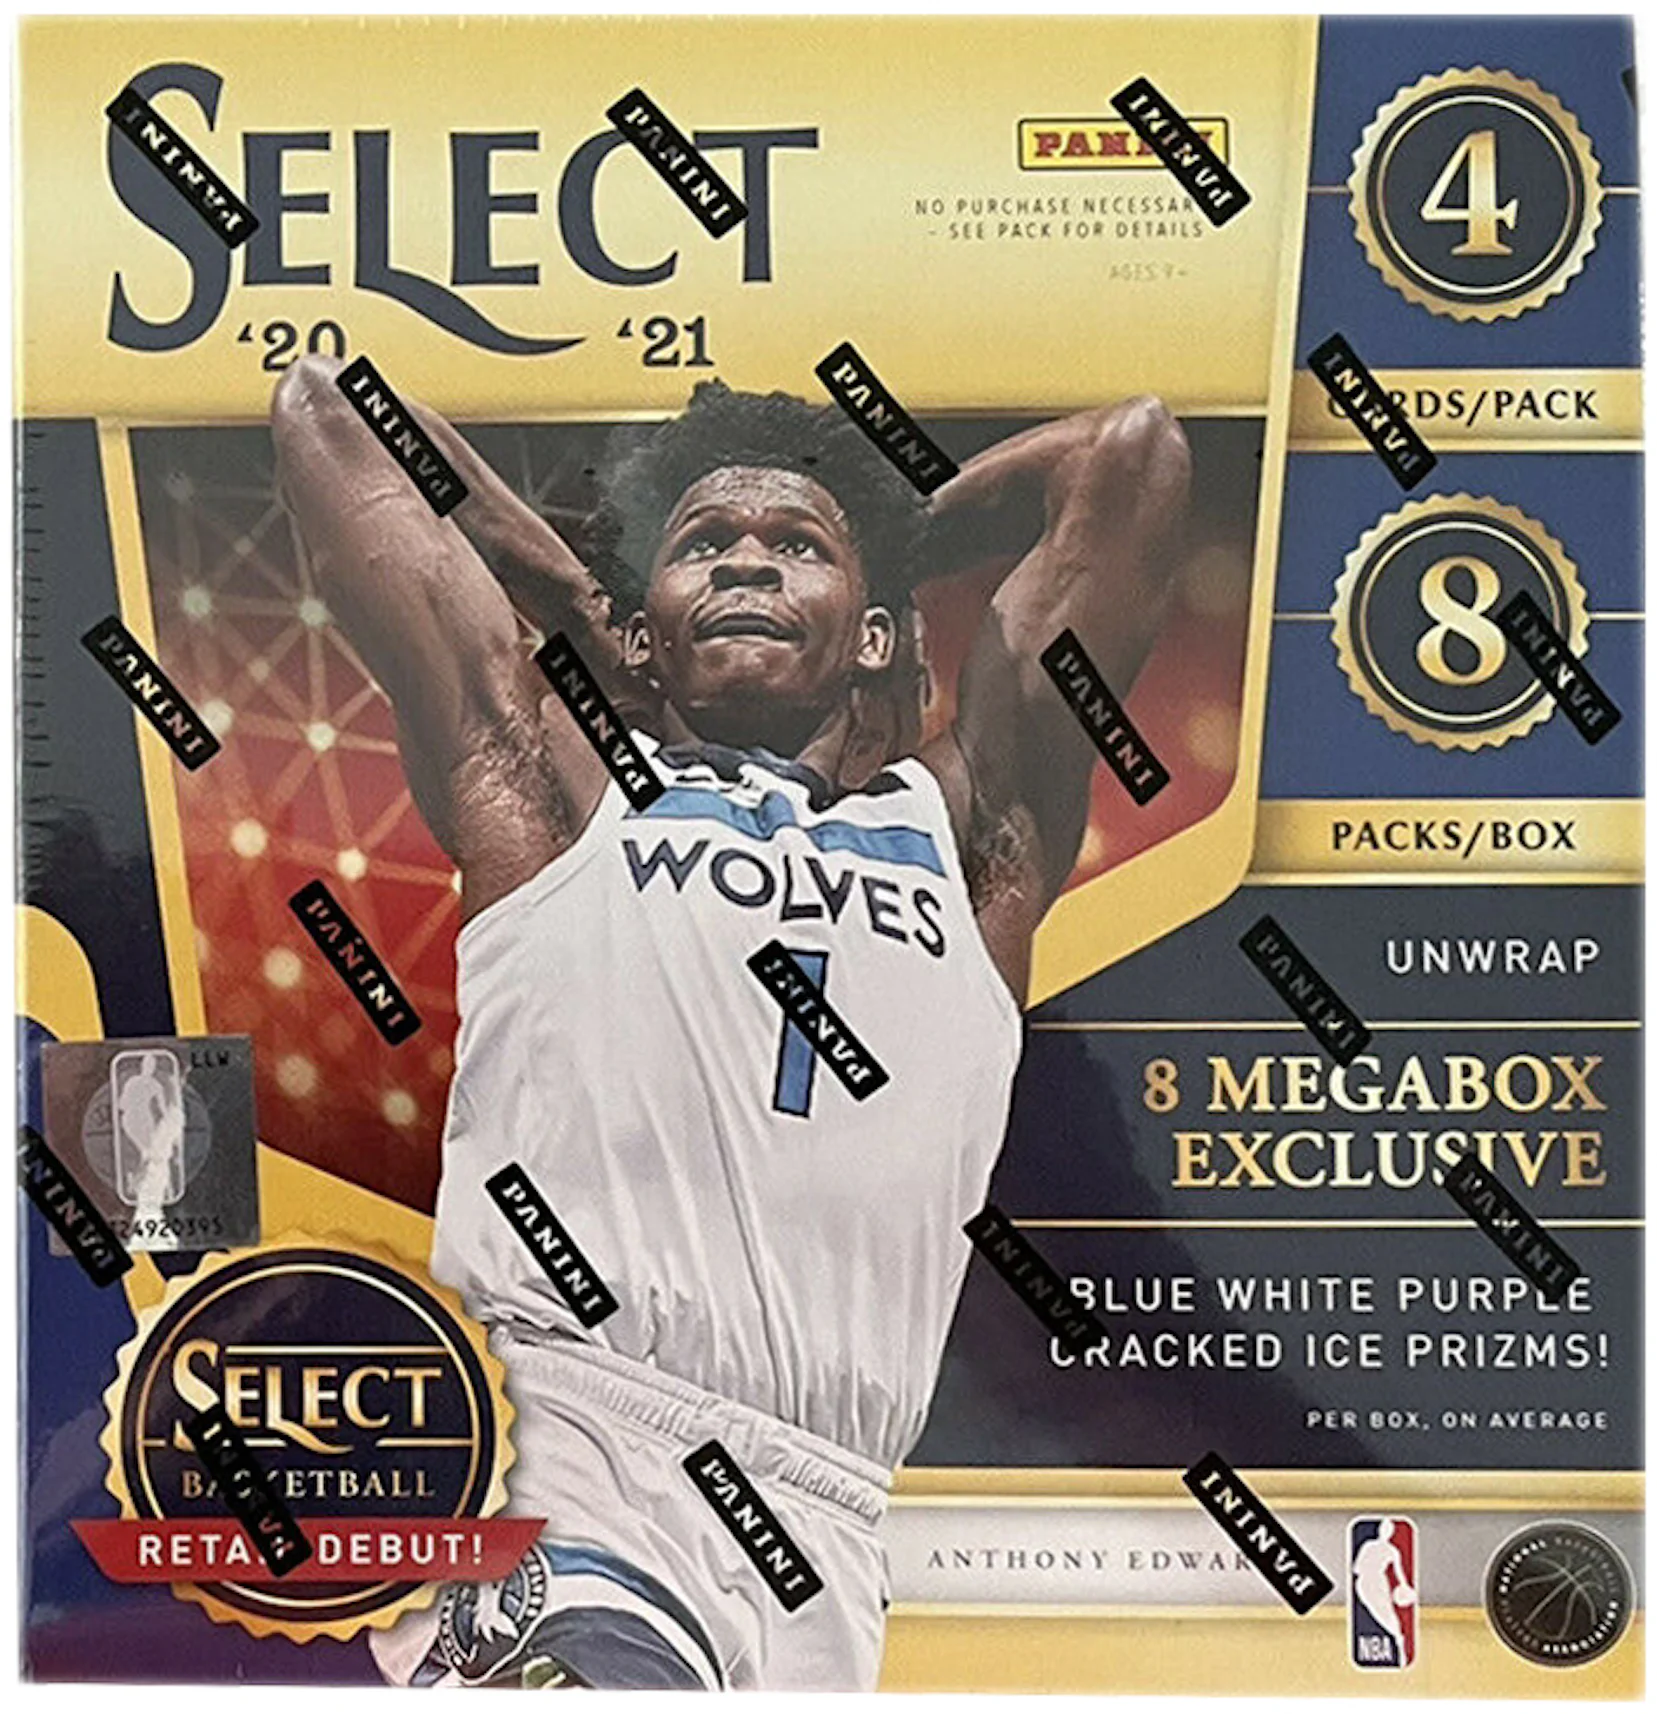 https://images.stockx.com/images/2020-21-Panini-Select-Basketball-Mega-Box-Blue-White-Purple-Cracked-Ice-Prizms.jpg?fit=fill&bg=FFFFFF&w=1200&h=857&fm=webp&auto=compress&dpr=2&trim=color&updated_at=1628820503&q=60